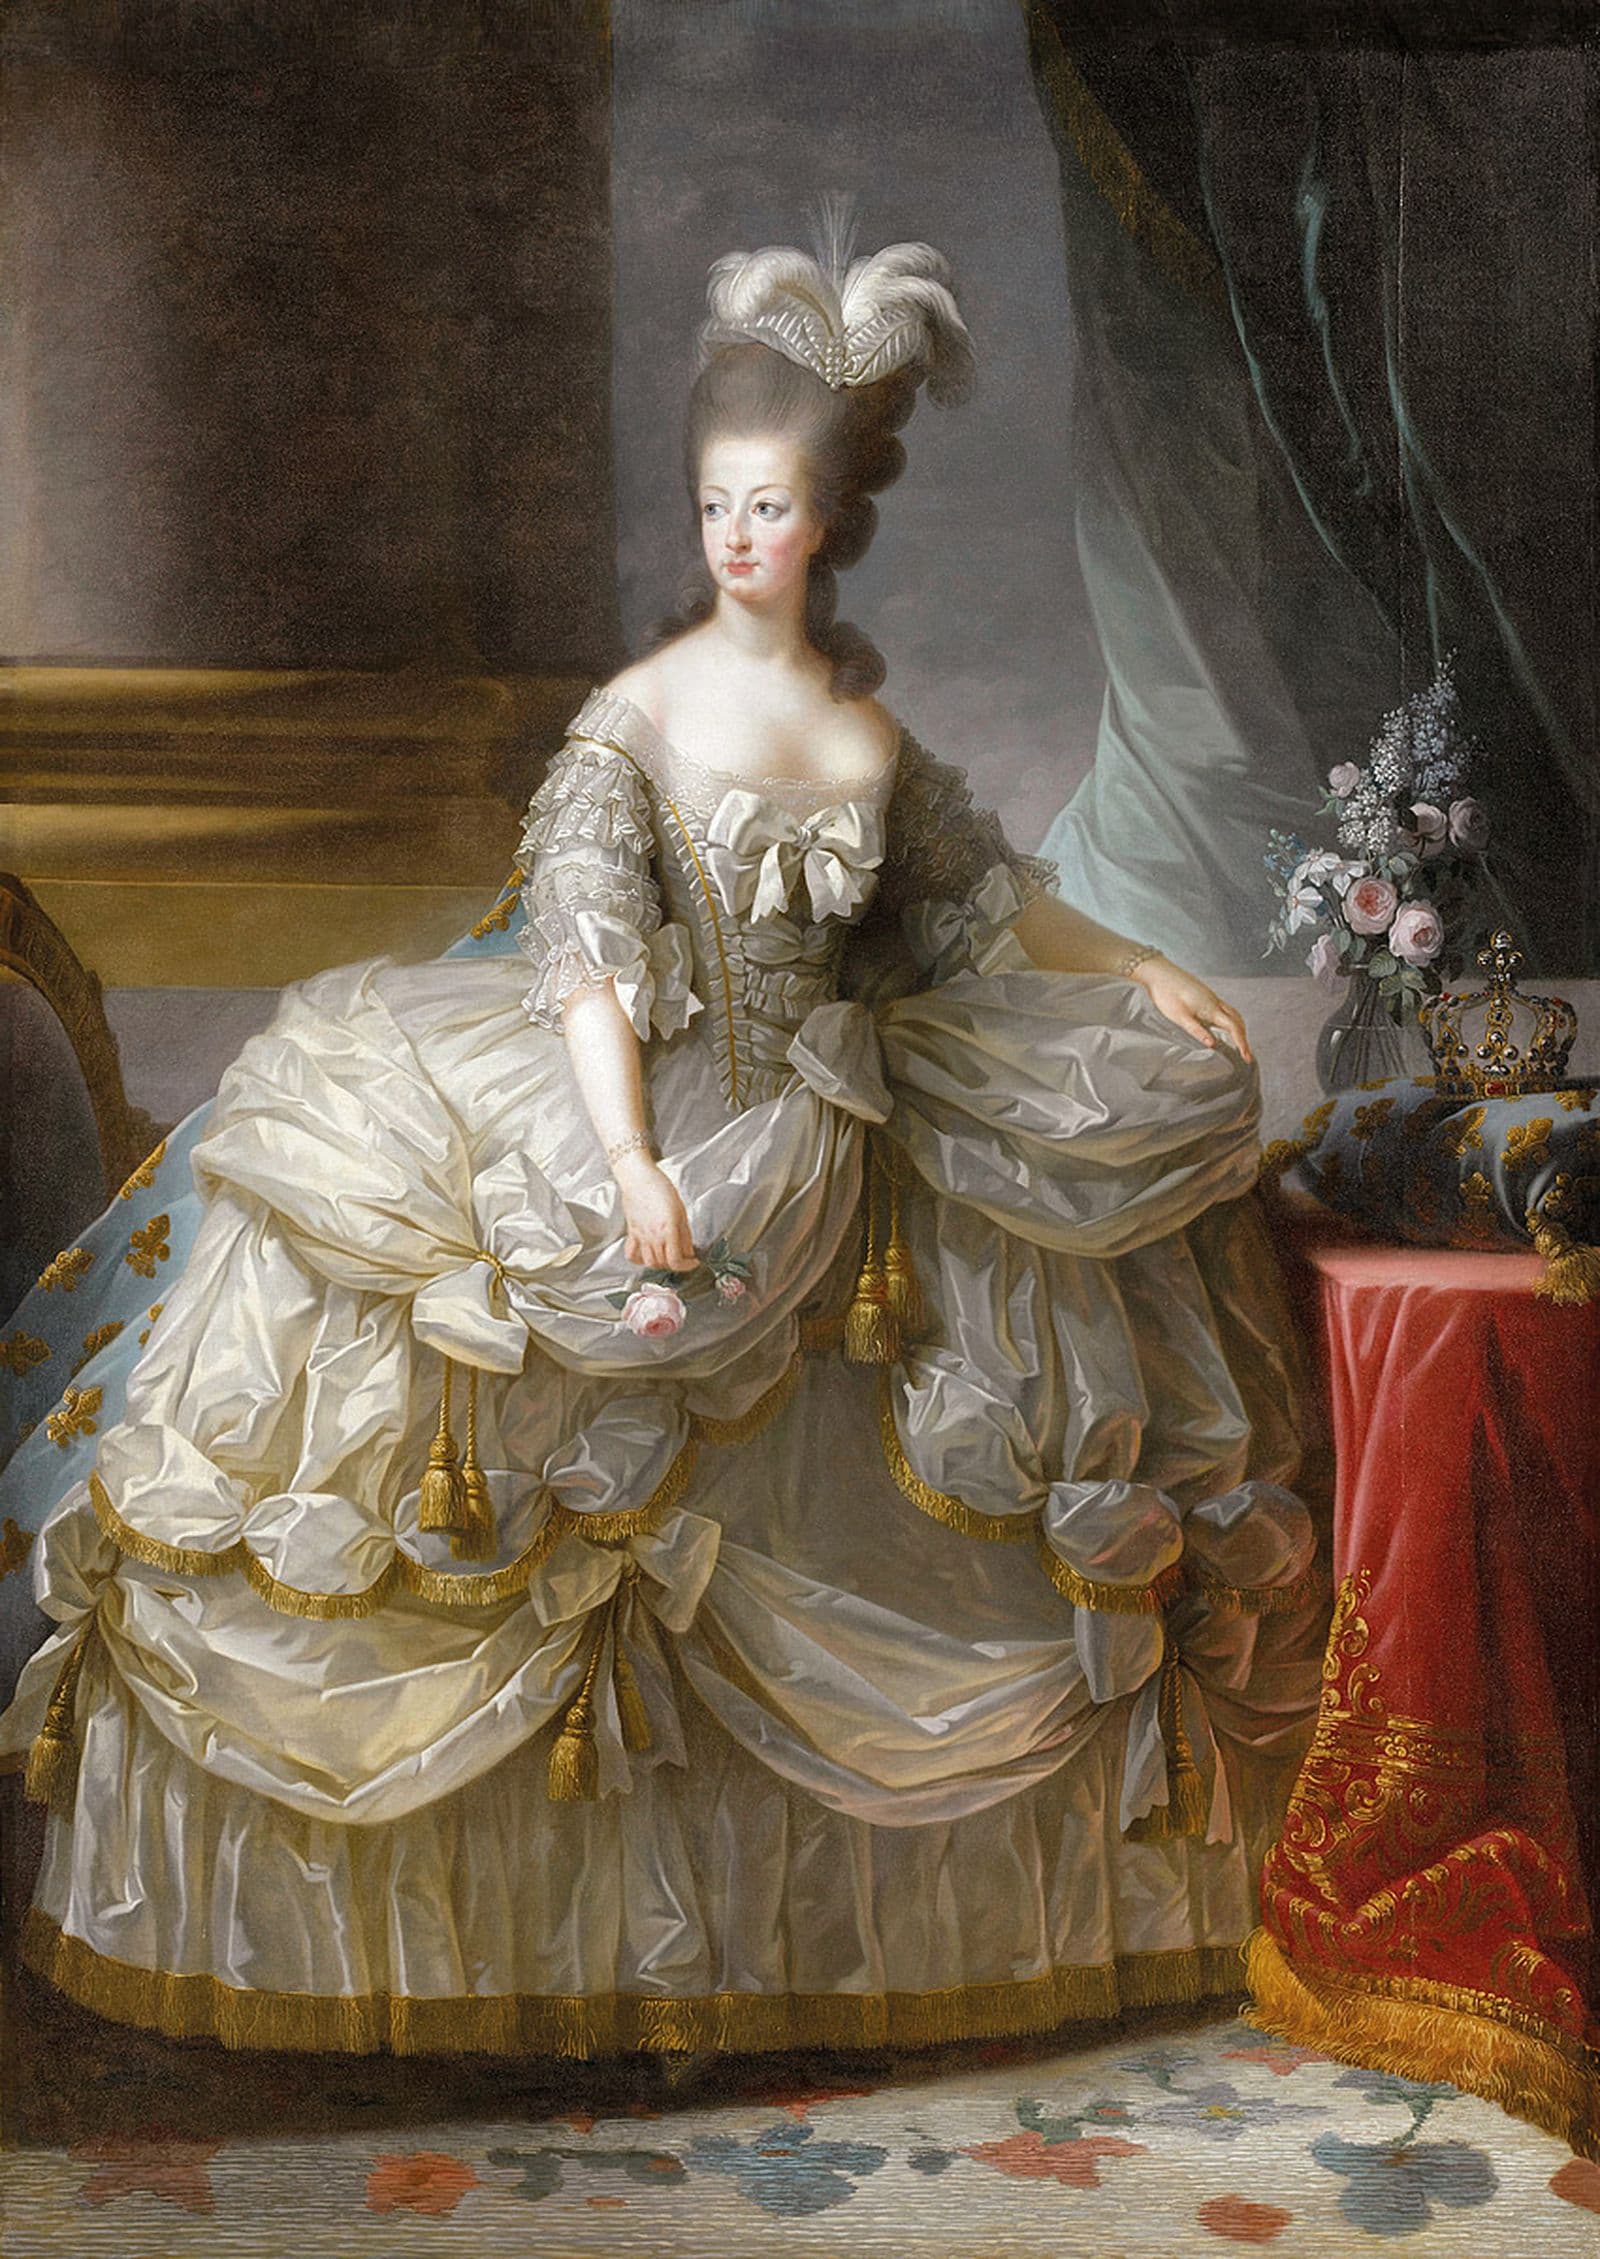 full-length portrait of Queen Marie Antoinette wearing silver and gold iridescent dress with voluminous skirt